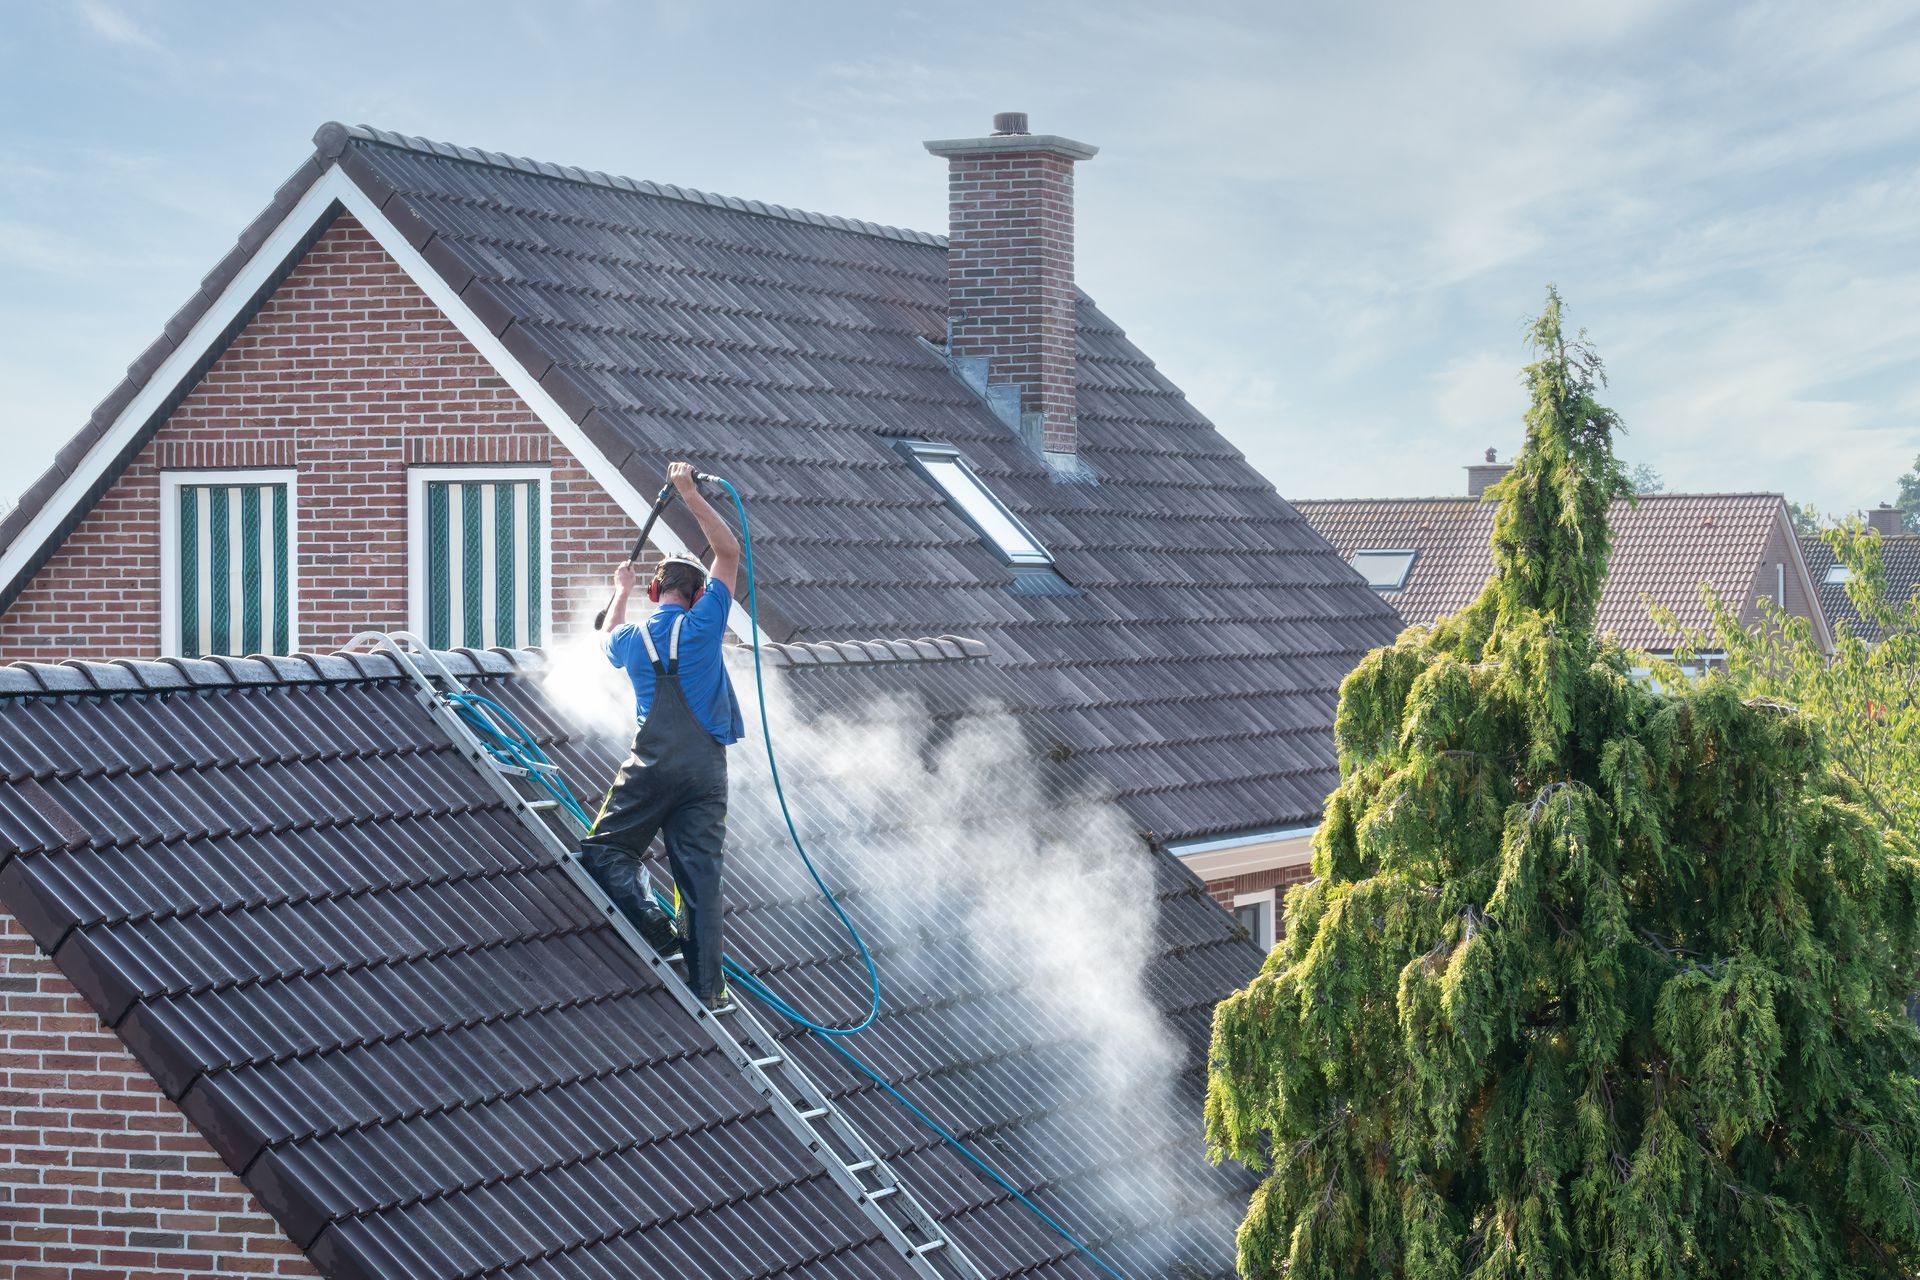 A person using a pressure washer to clean the roof tiles of a house during a soft washing process.